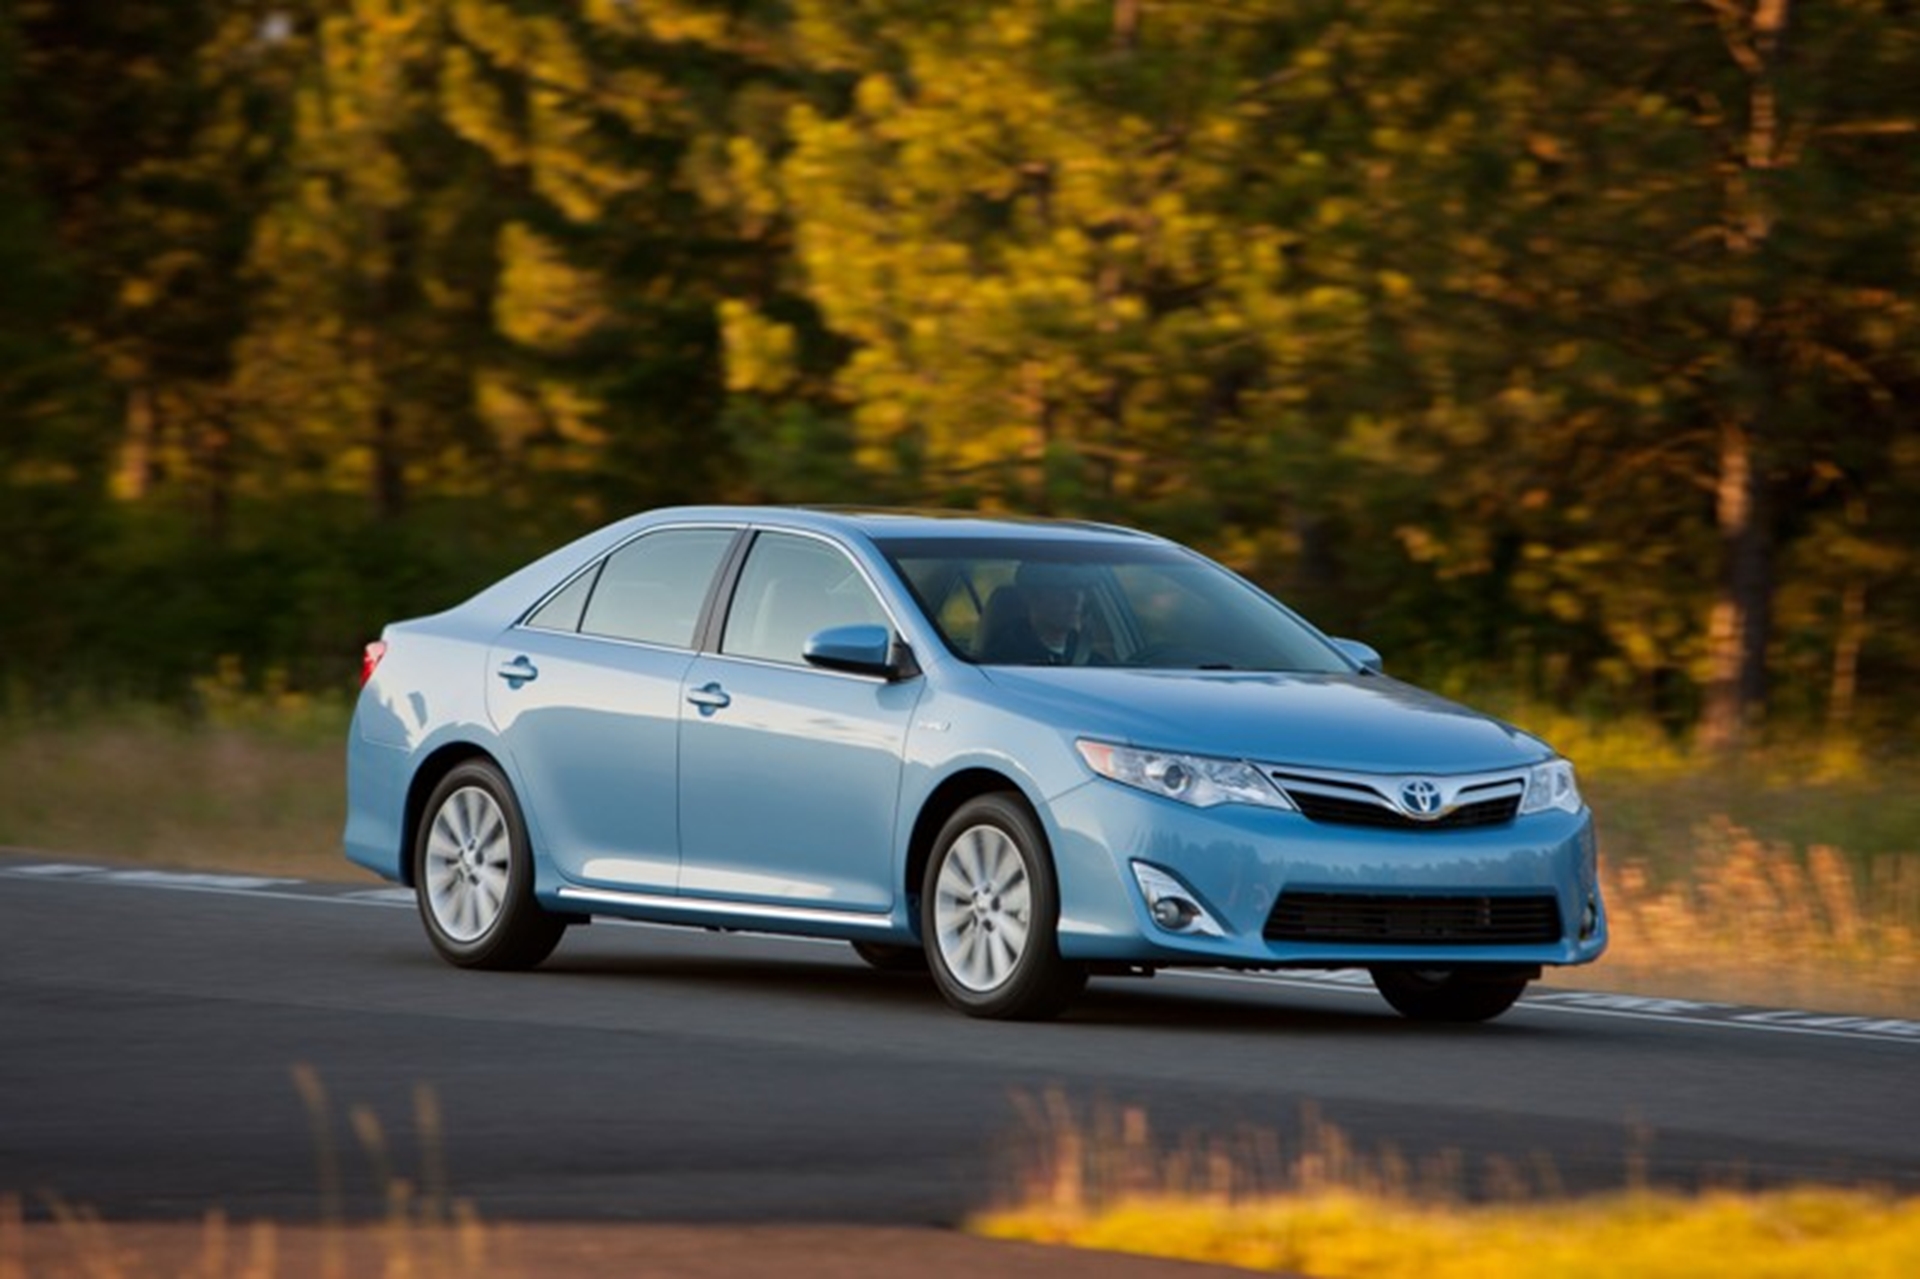 Toyota Announces Arrival of 2012 Camry Hybrid to Dealerships